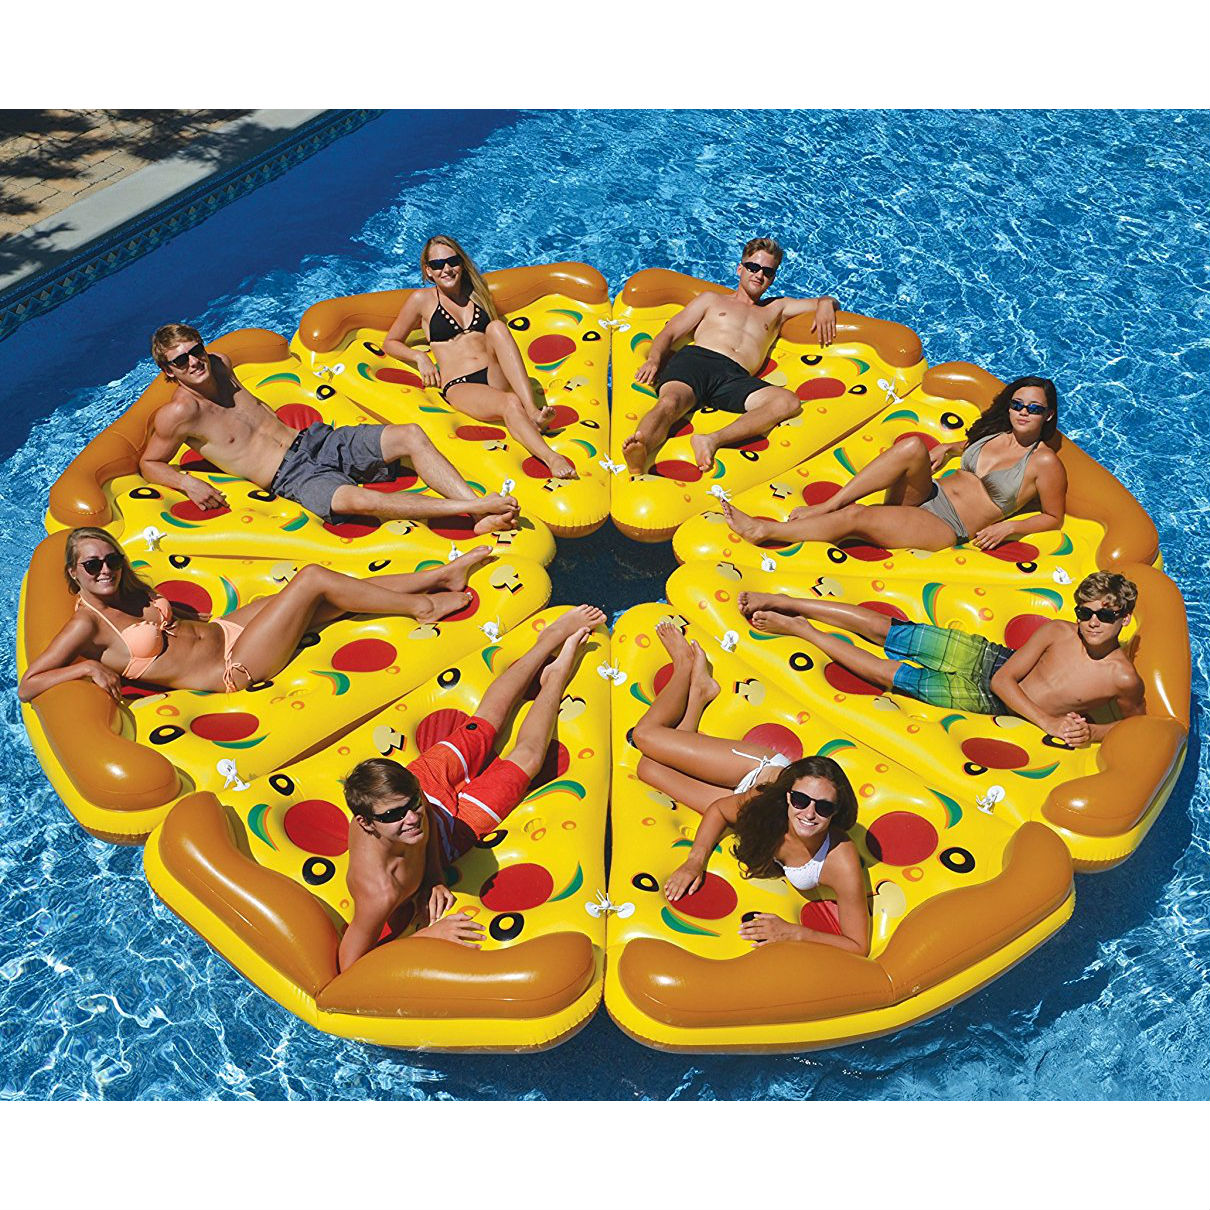 Giant Inflatable Pizza Slices